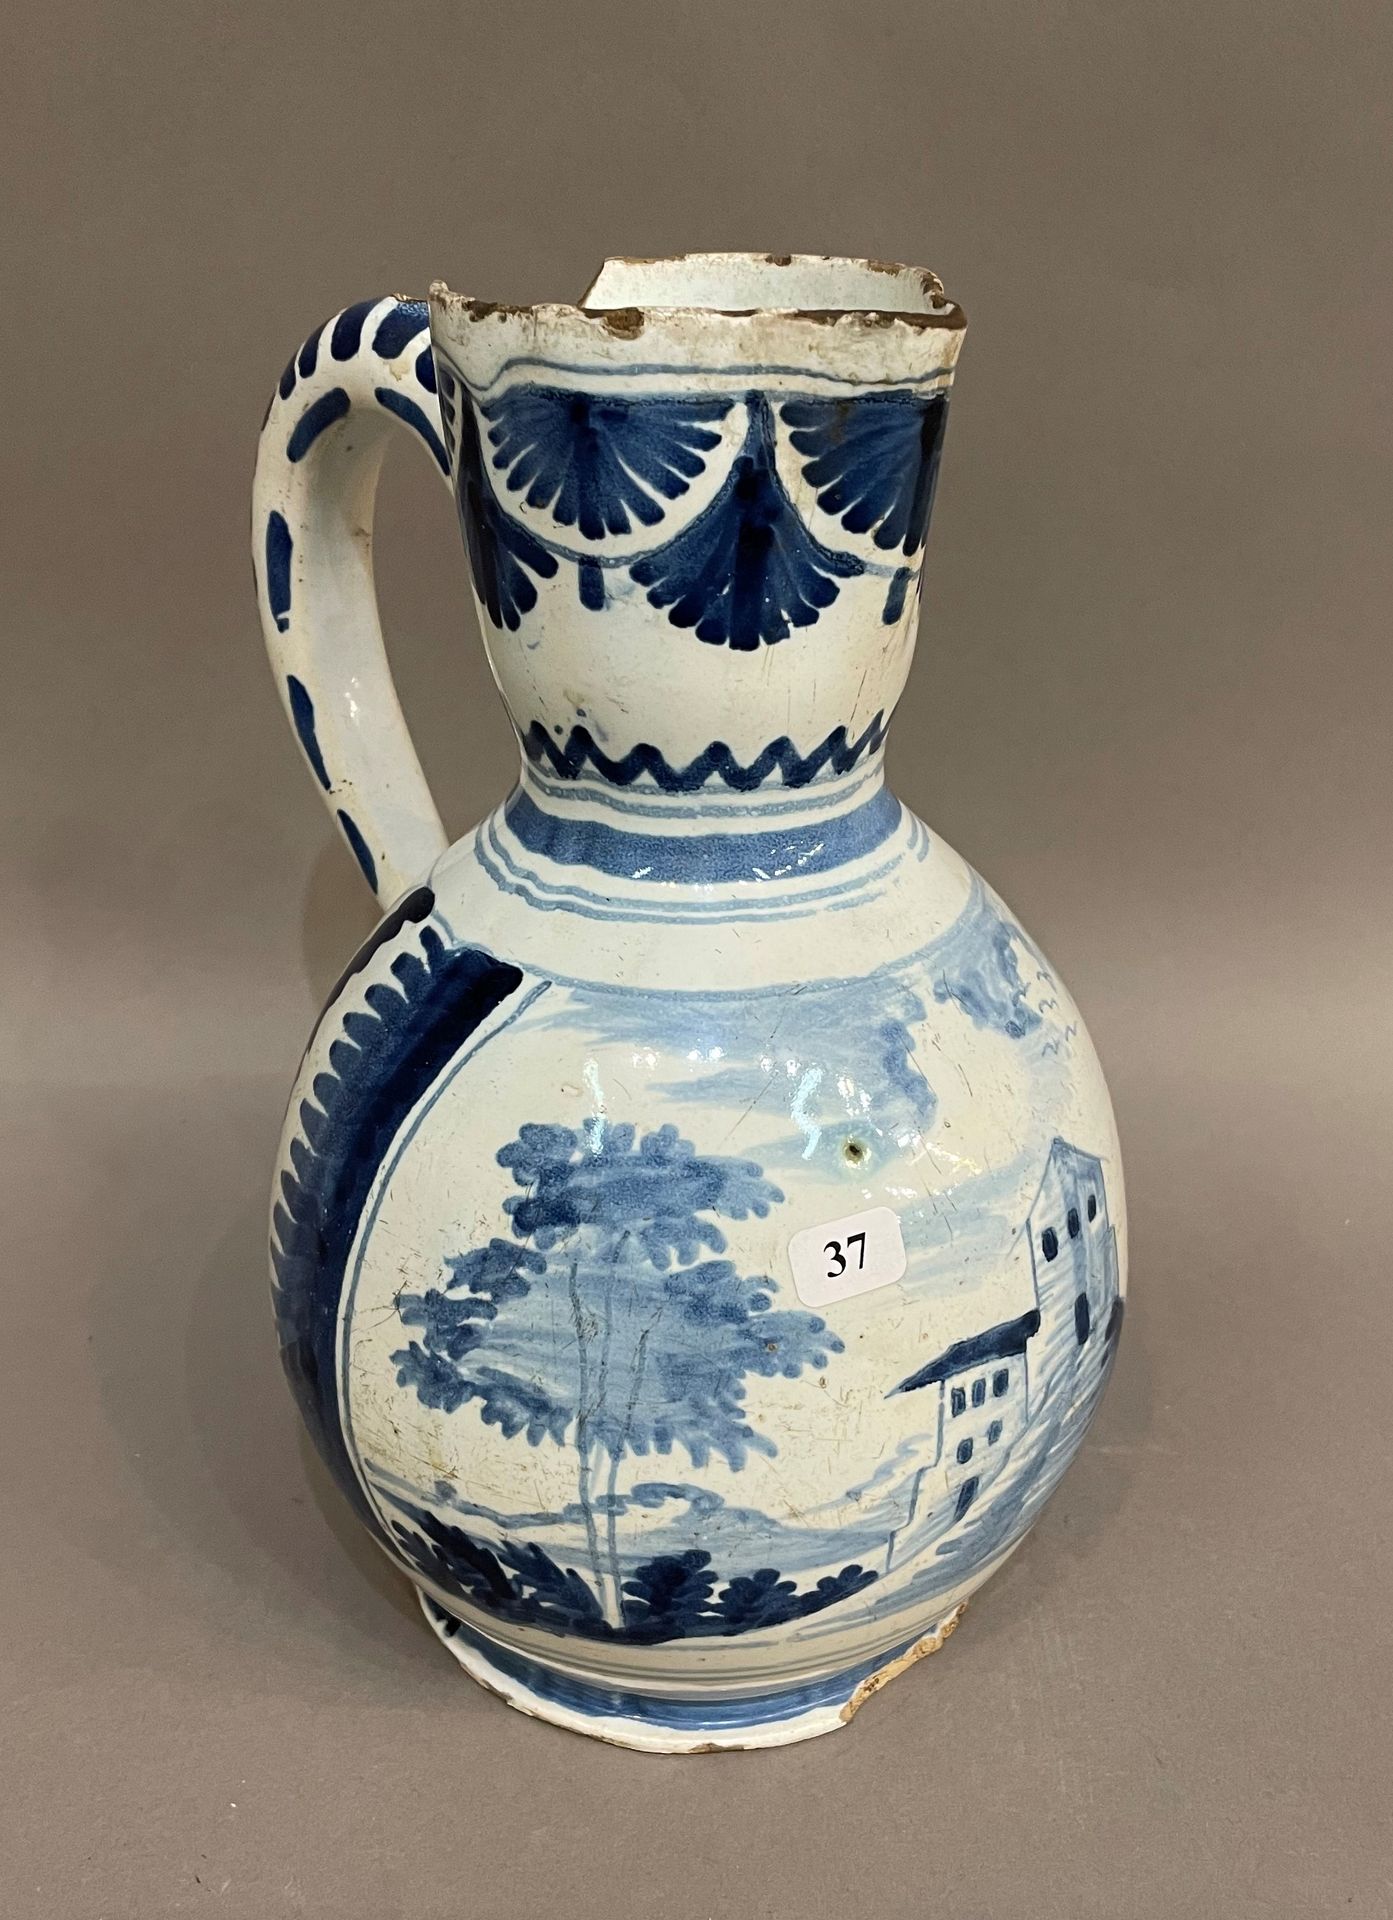 Null Rouen

Earthenware pitcher decorated in blue monochrome of a landscape with&hellip;